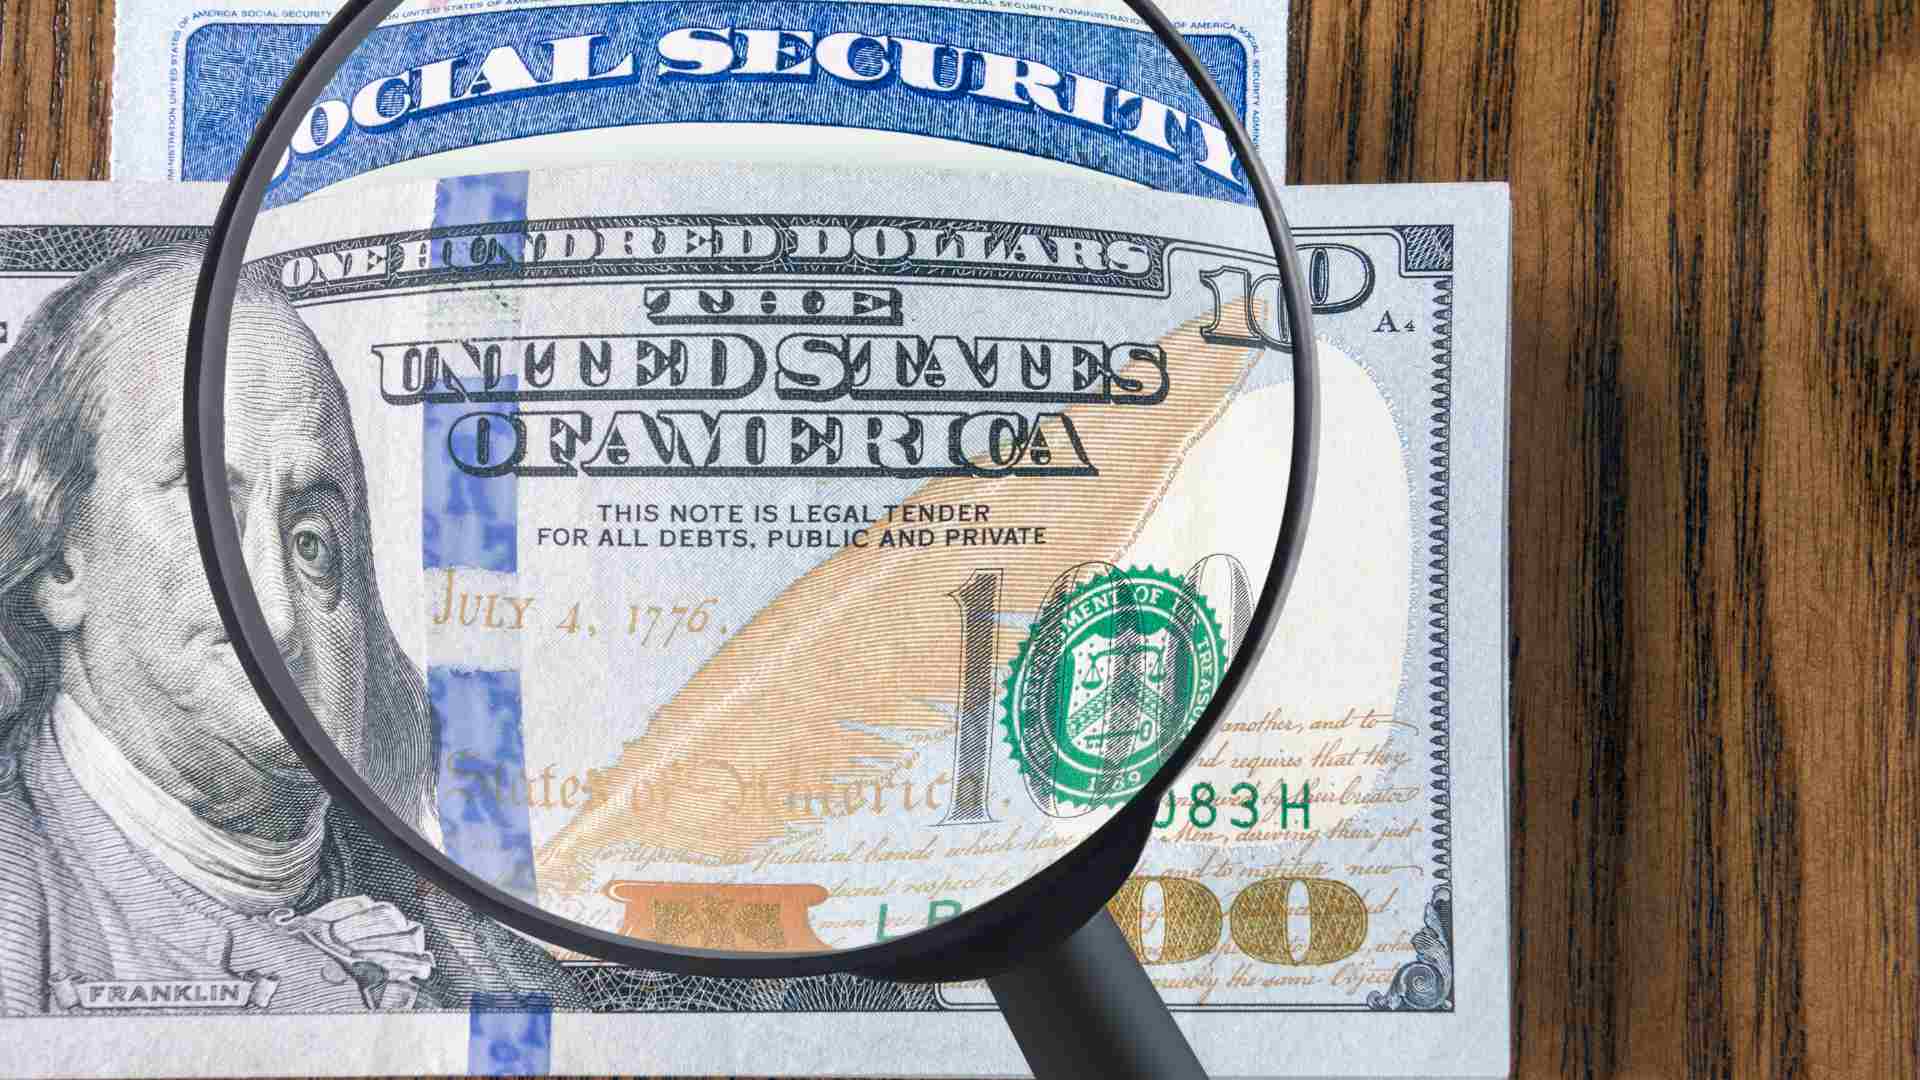 Do not forget that you can claim your Social Security benefits at the age of 62, whether you get direct deposit or not